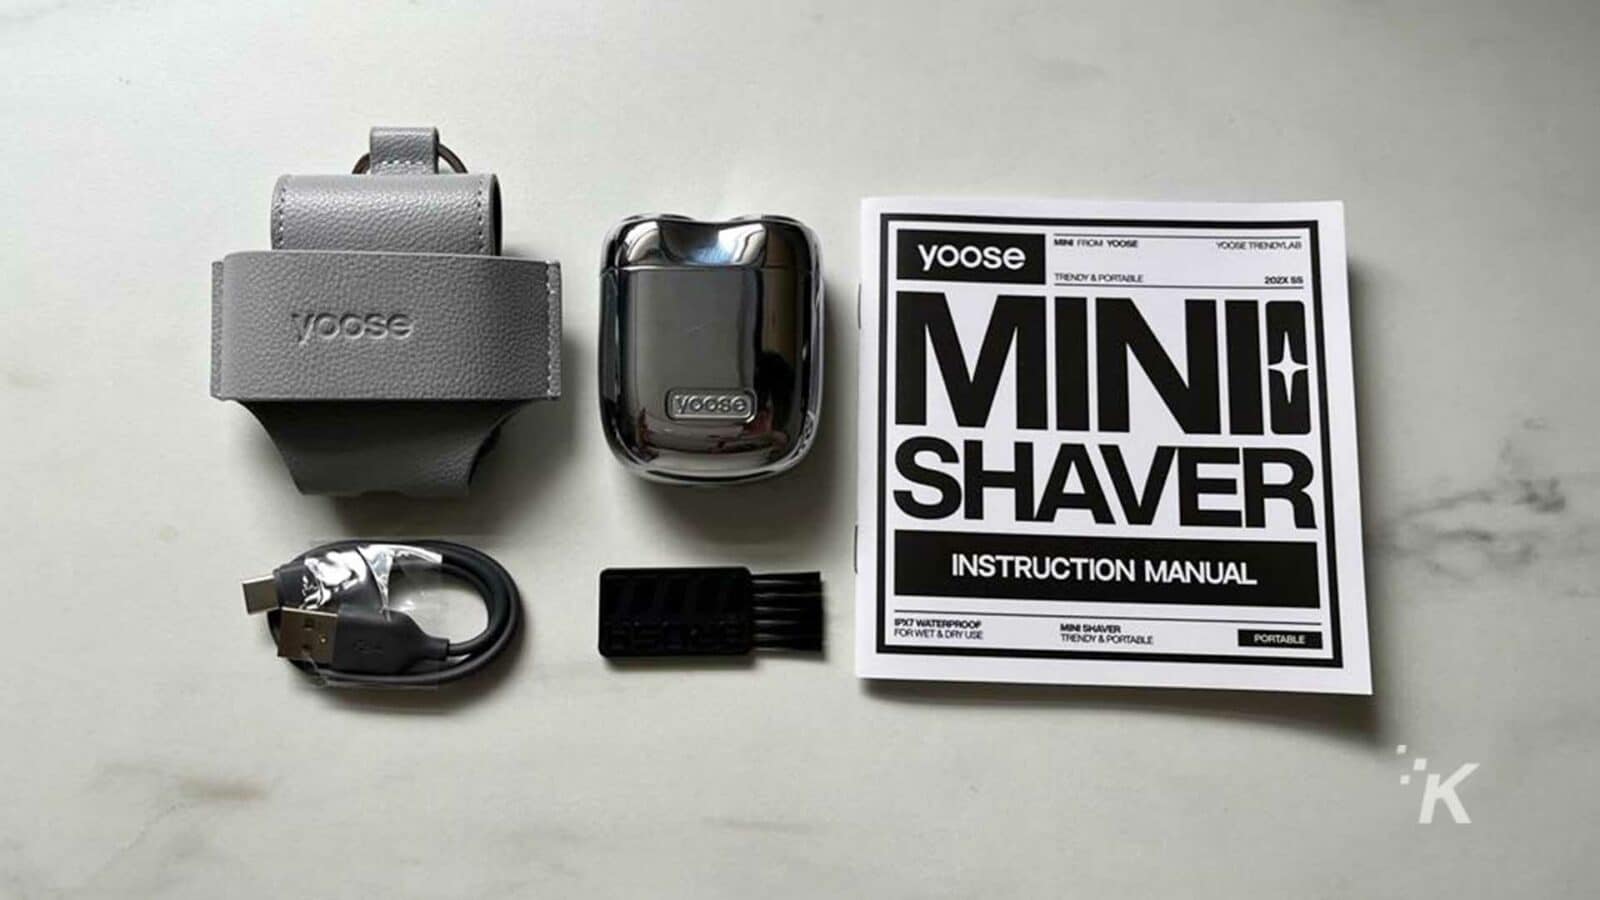 This image is an instruction manual for a waterproof, wet and dry mini shaver called the 202X 85 Mini Vooso Shaver. Full Text: yoose LEON FROM YOOUR YOUGE THENDRAB TRENDY & PORTABLE 202X 85 MINI voose VOOSO SHAVER INSTRUCTION MANUAL PX7 WATERPROOF FORWET & DRYUEZ MIN SHAVER TRENDY & PORTABLE PORTABLE 'K